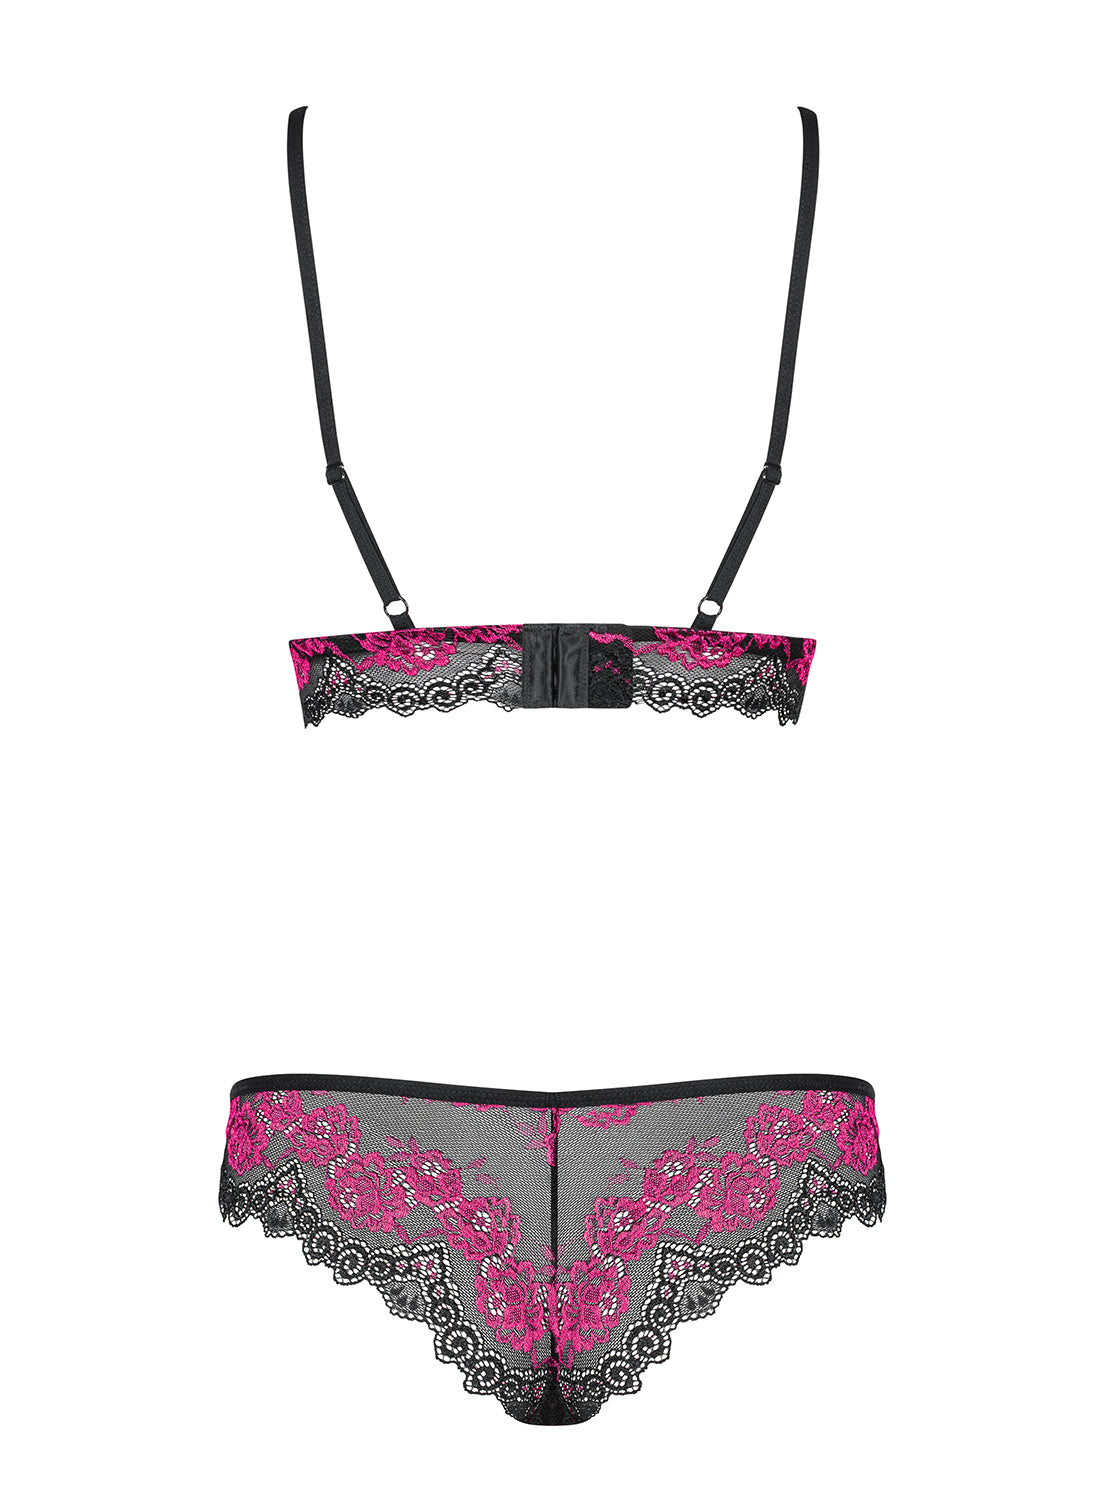 Tulia a black and pink set with floral lace a beautiful bra with soft cups a panty with ComfyCut cut